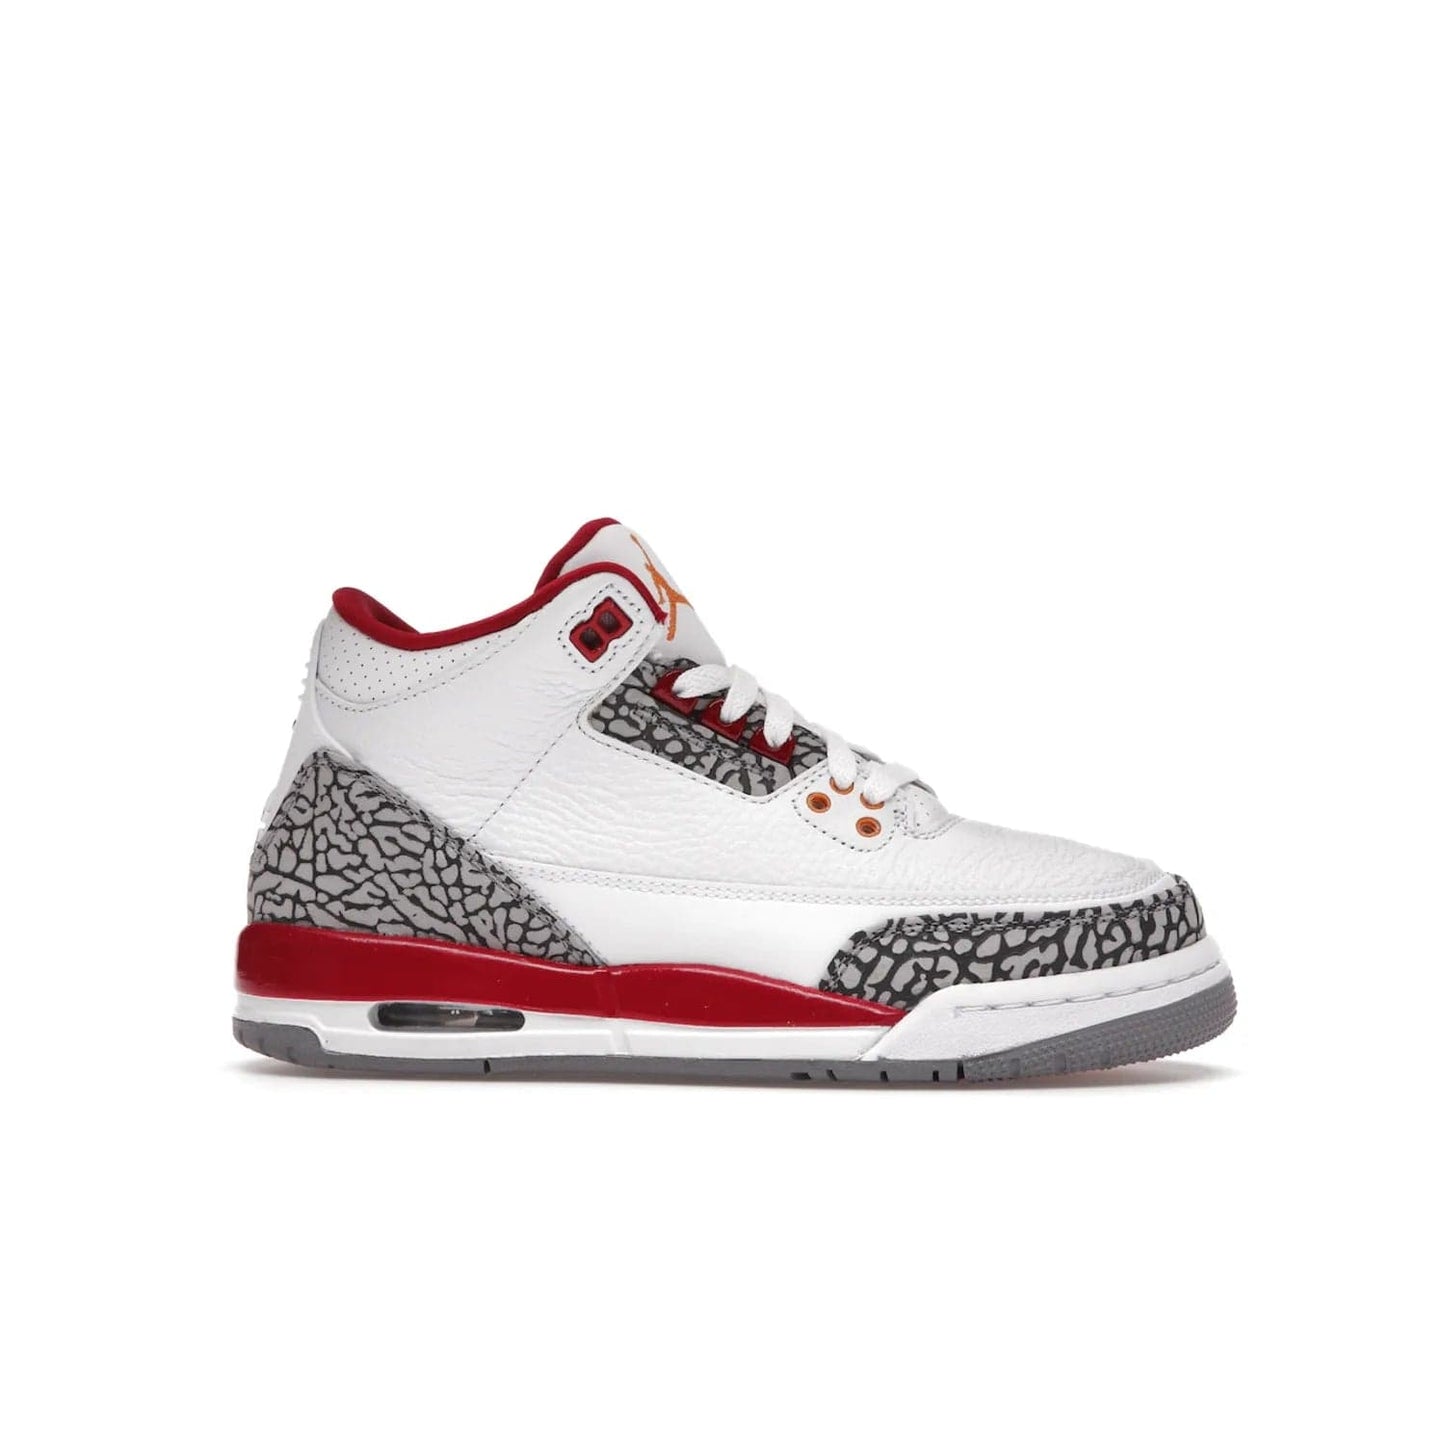 Jordan 3 Retro Cardinal (GS) - Image 2 - Only at www.BallersClubKickz.com - Shop the kid-sized Air Jordan 3 Retro Cardinal GS, released Feb 2022. White tumbled leather upper, light curry accenting, cement grey and classic red details throughout. Visible Air cushioning, midsole, and an eye-catching outsole. Show off your style with this fashionable streetwear silhouette.